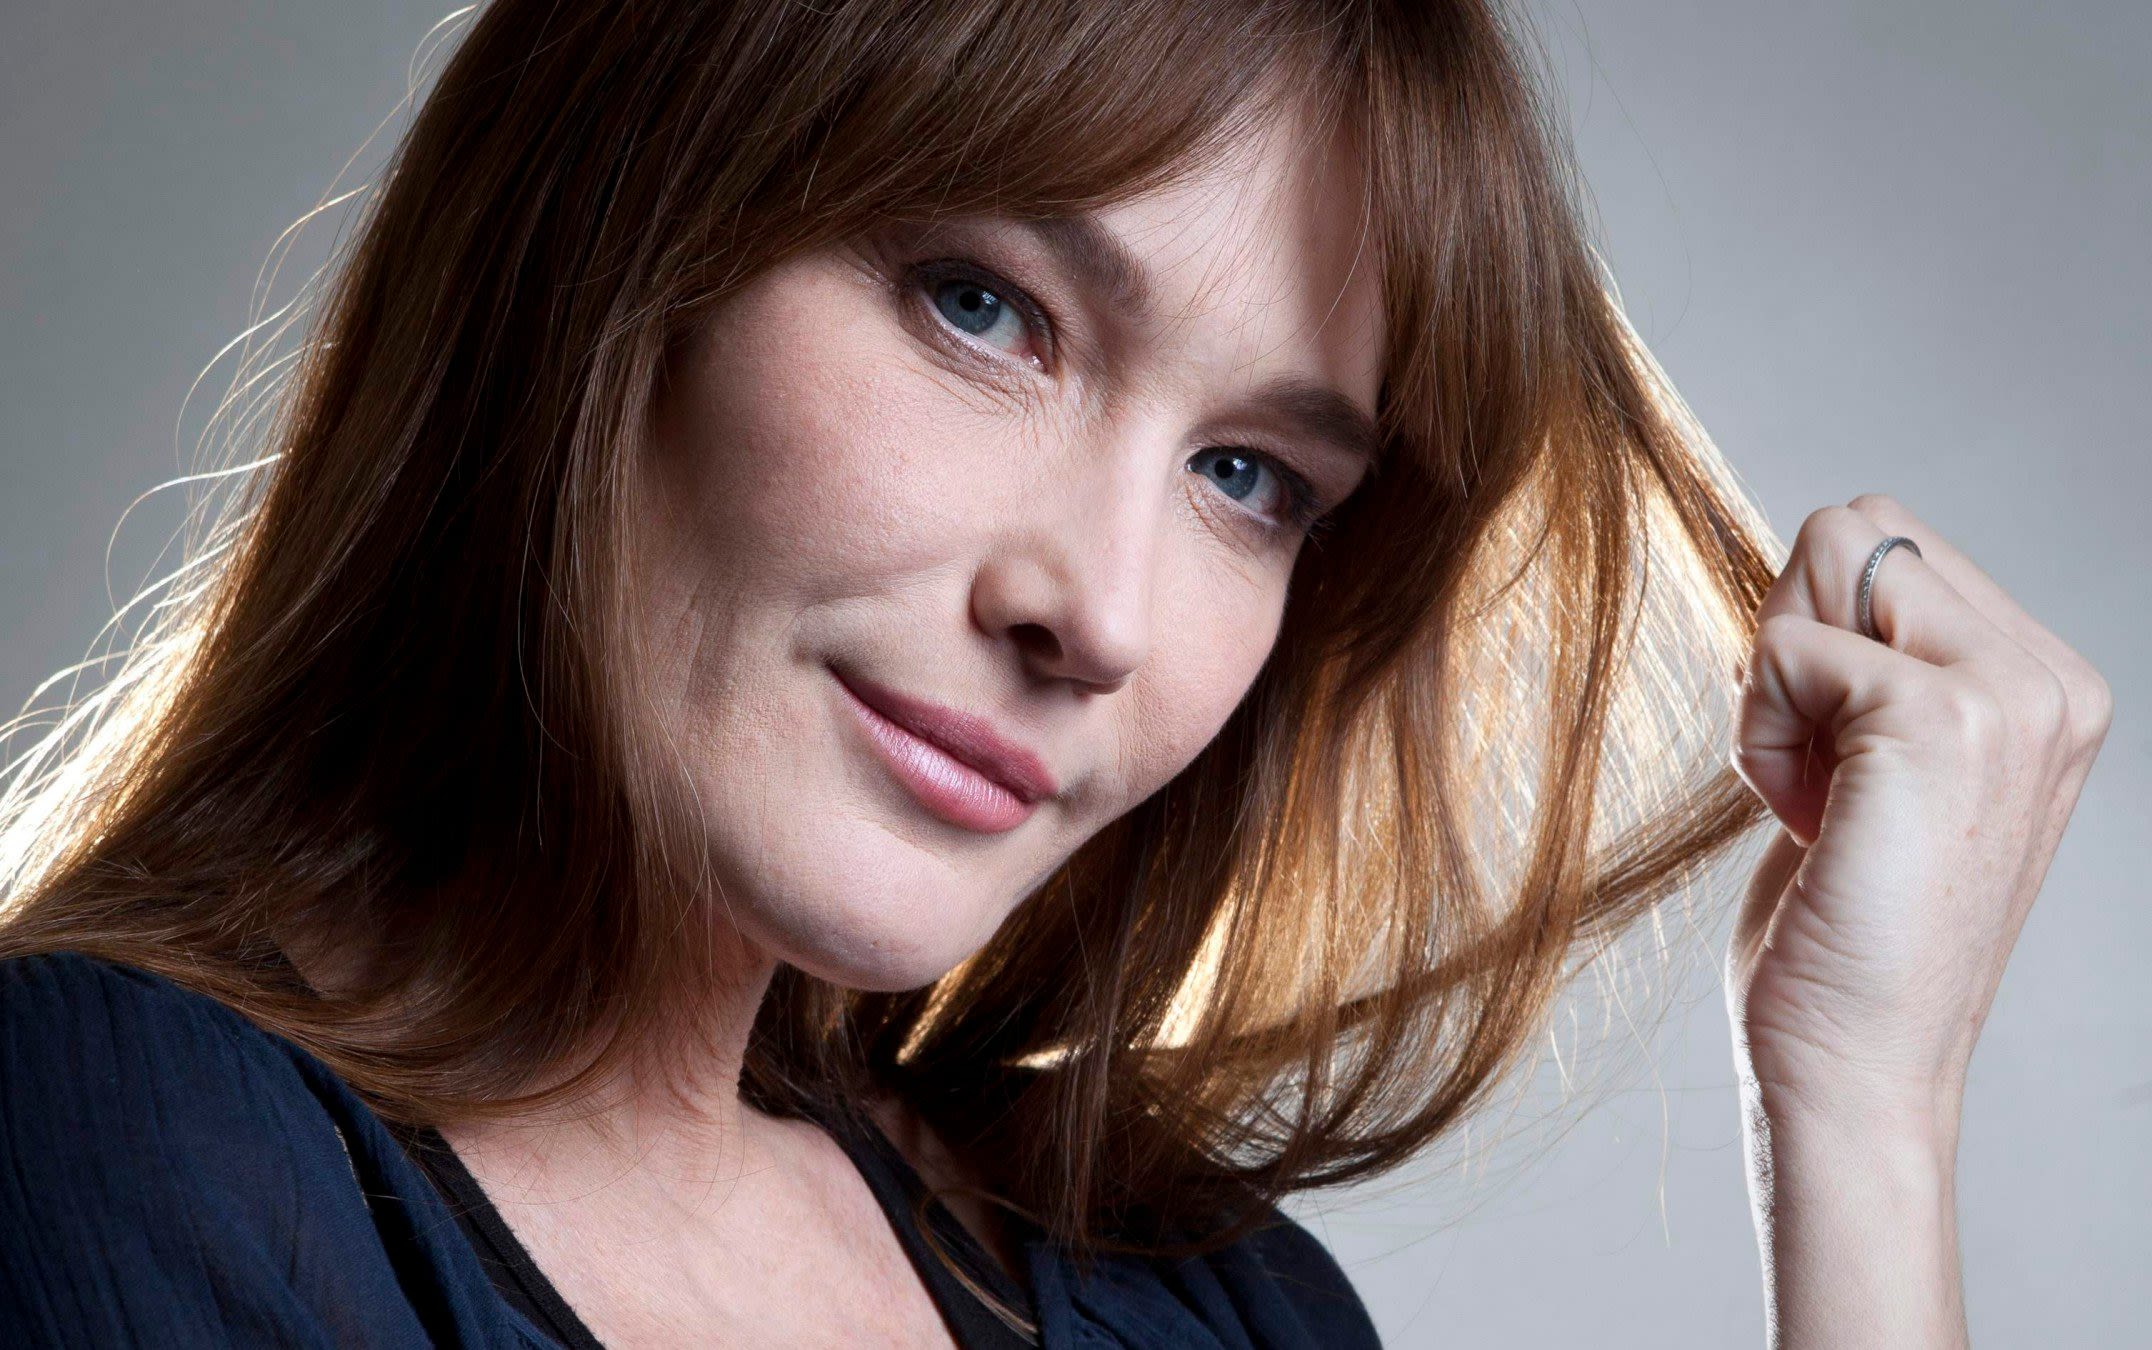 France’s former first lady Carla Bruni-Sarkozy charged with corruption